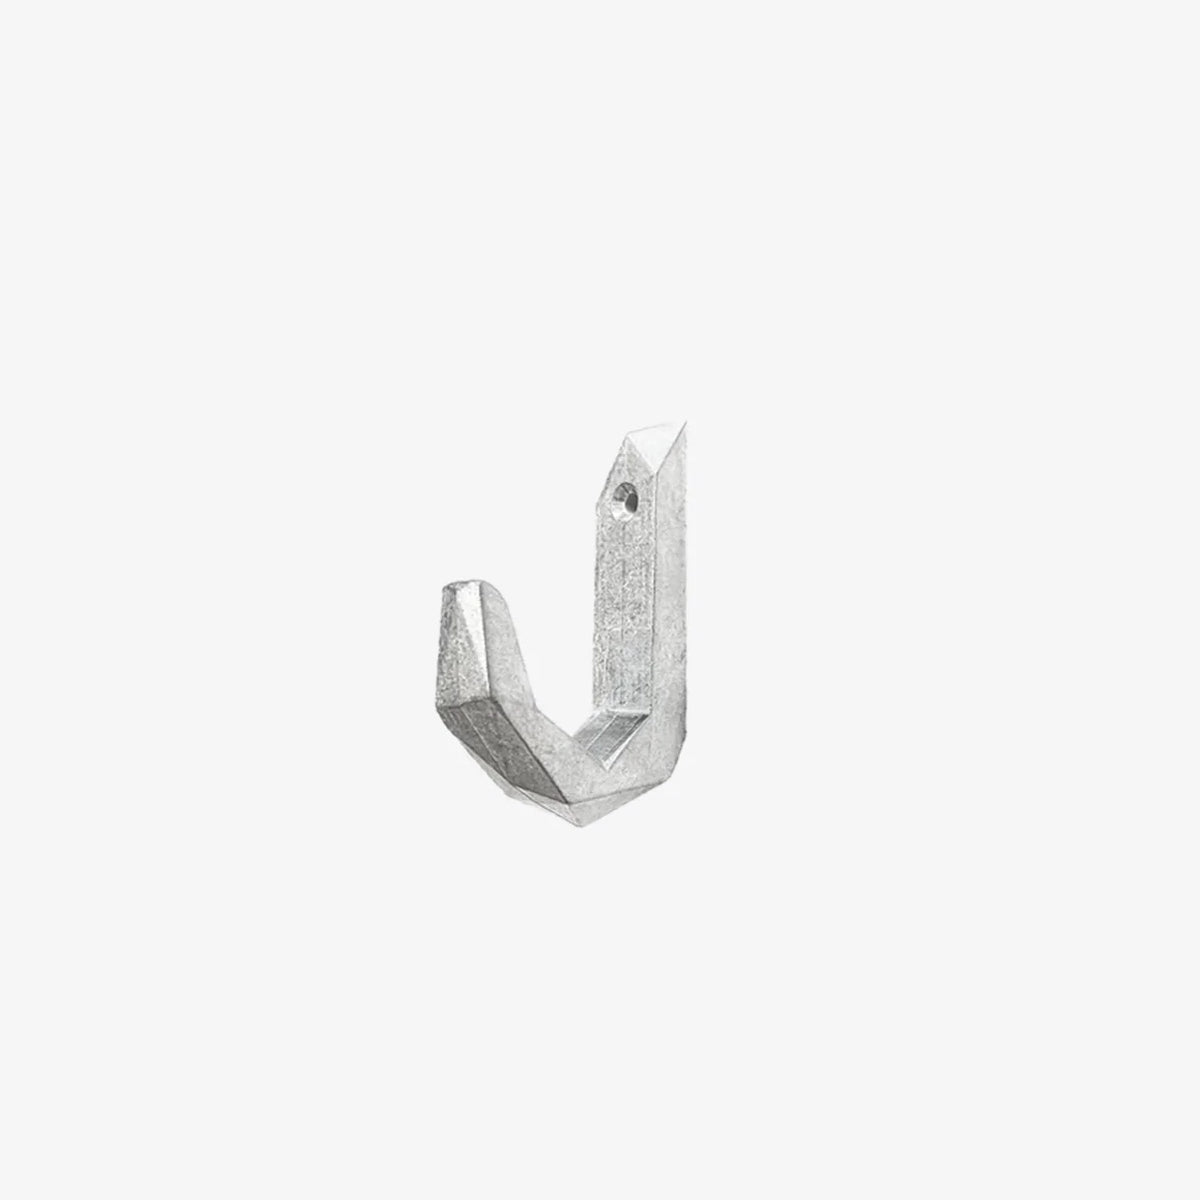 A Hookalotti metal hook on a white background by Martino Gamper.